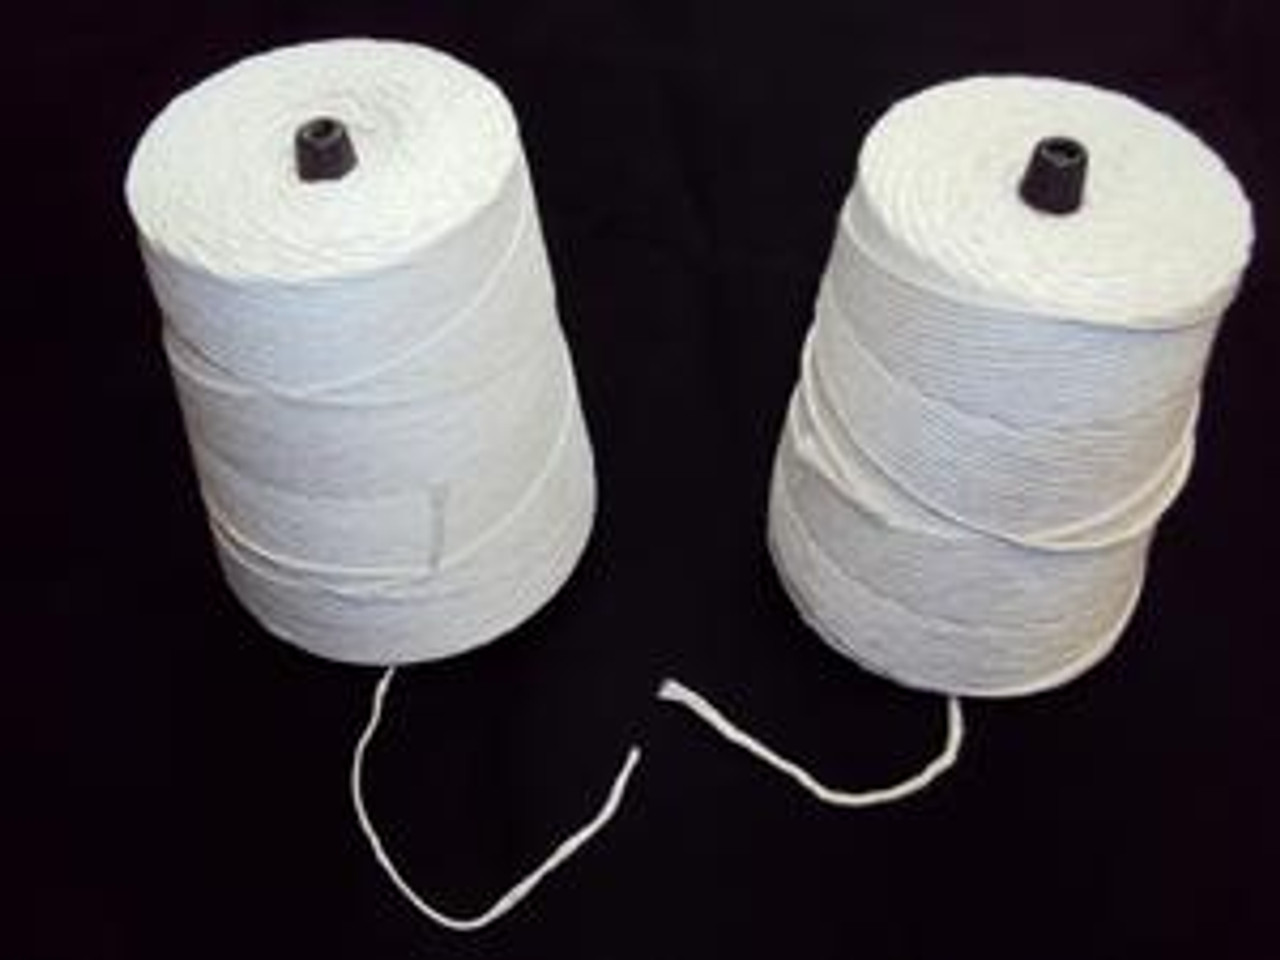 Large Cone Butcher Twine Cotton / Poly, 24 ply. - Butcher Supply Company